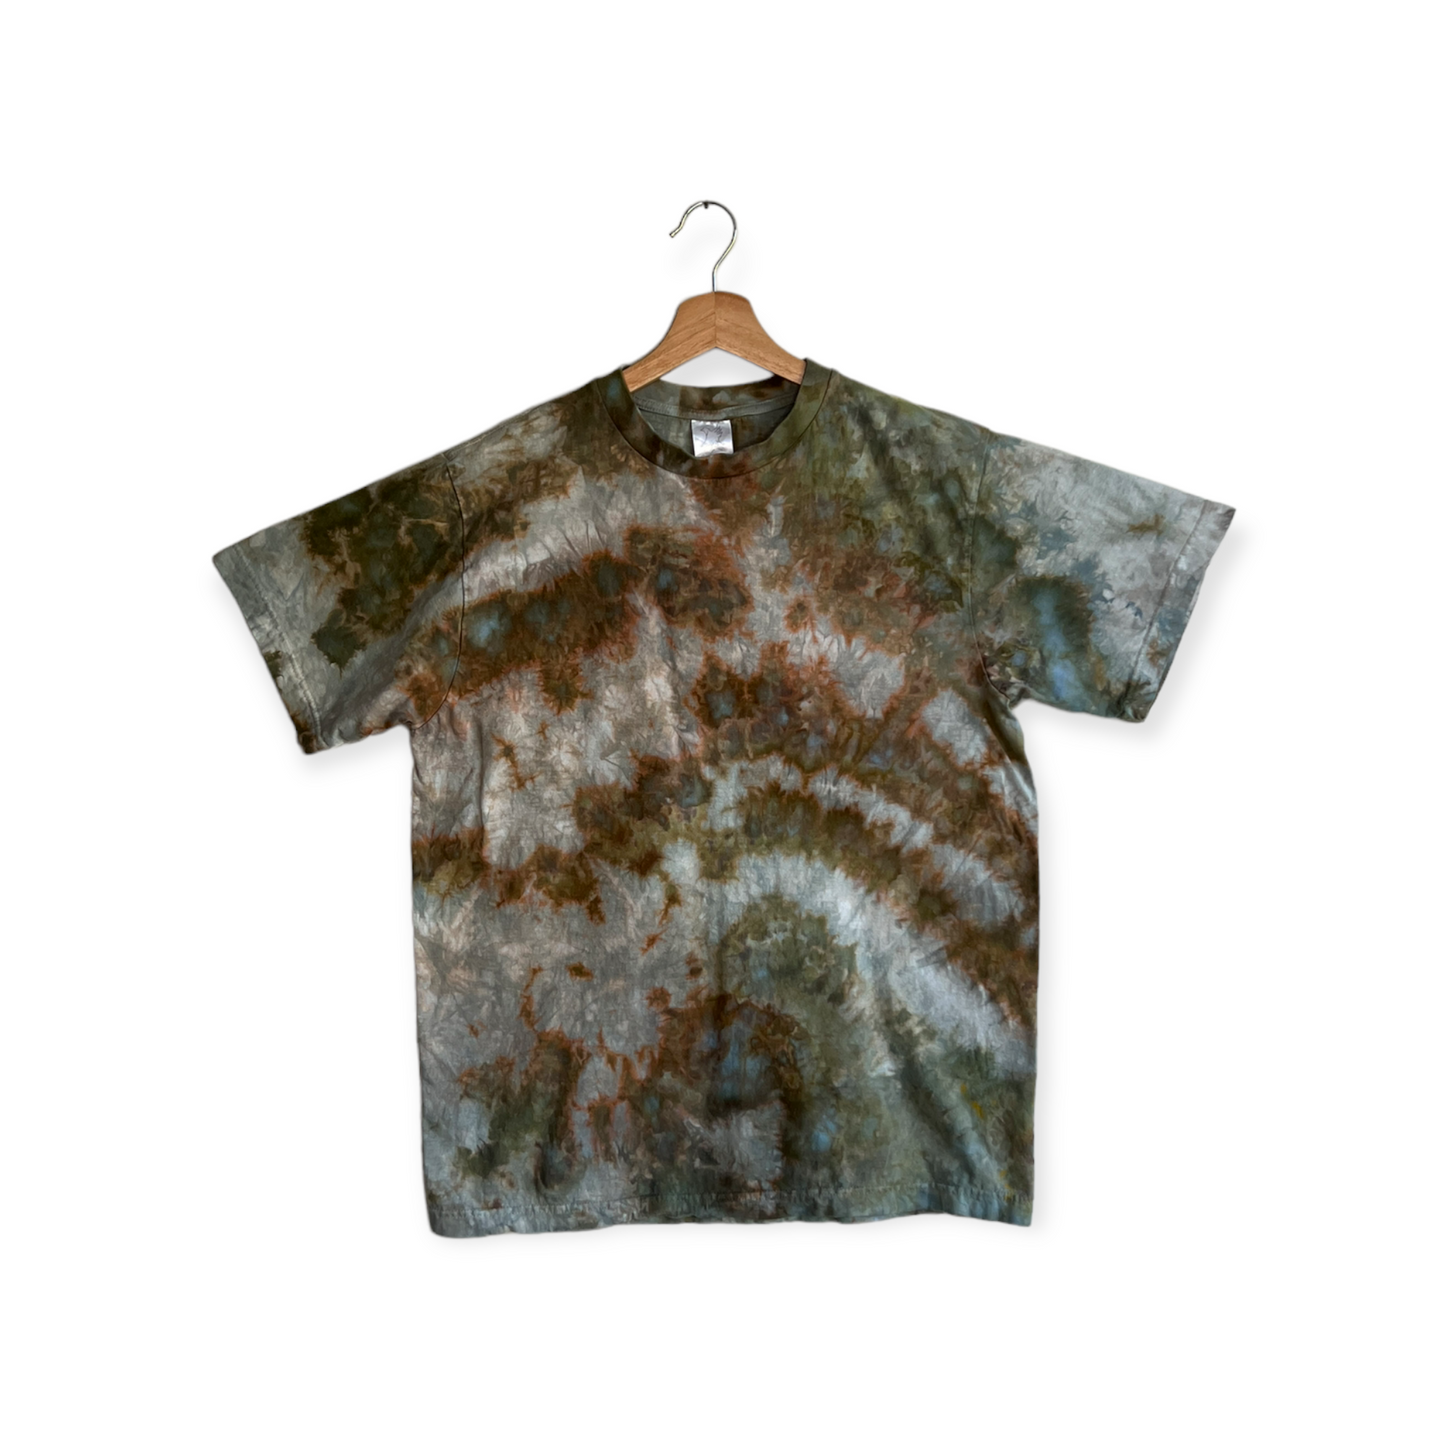 Rusted Steel T-Shirt (M)